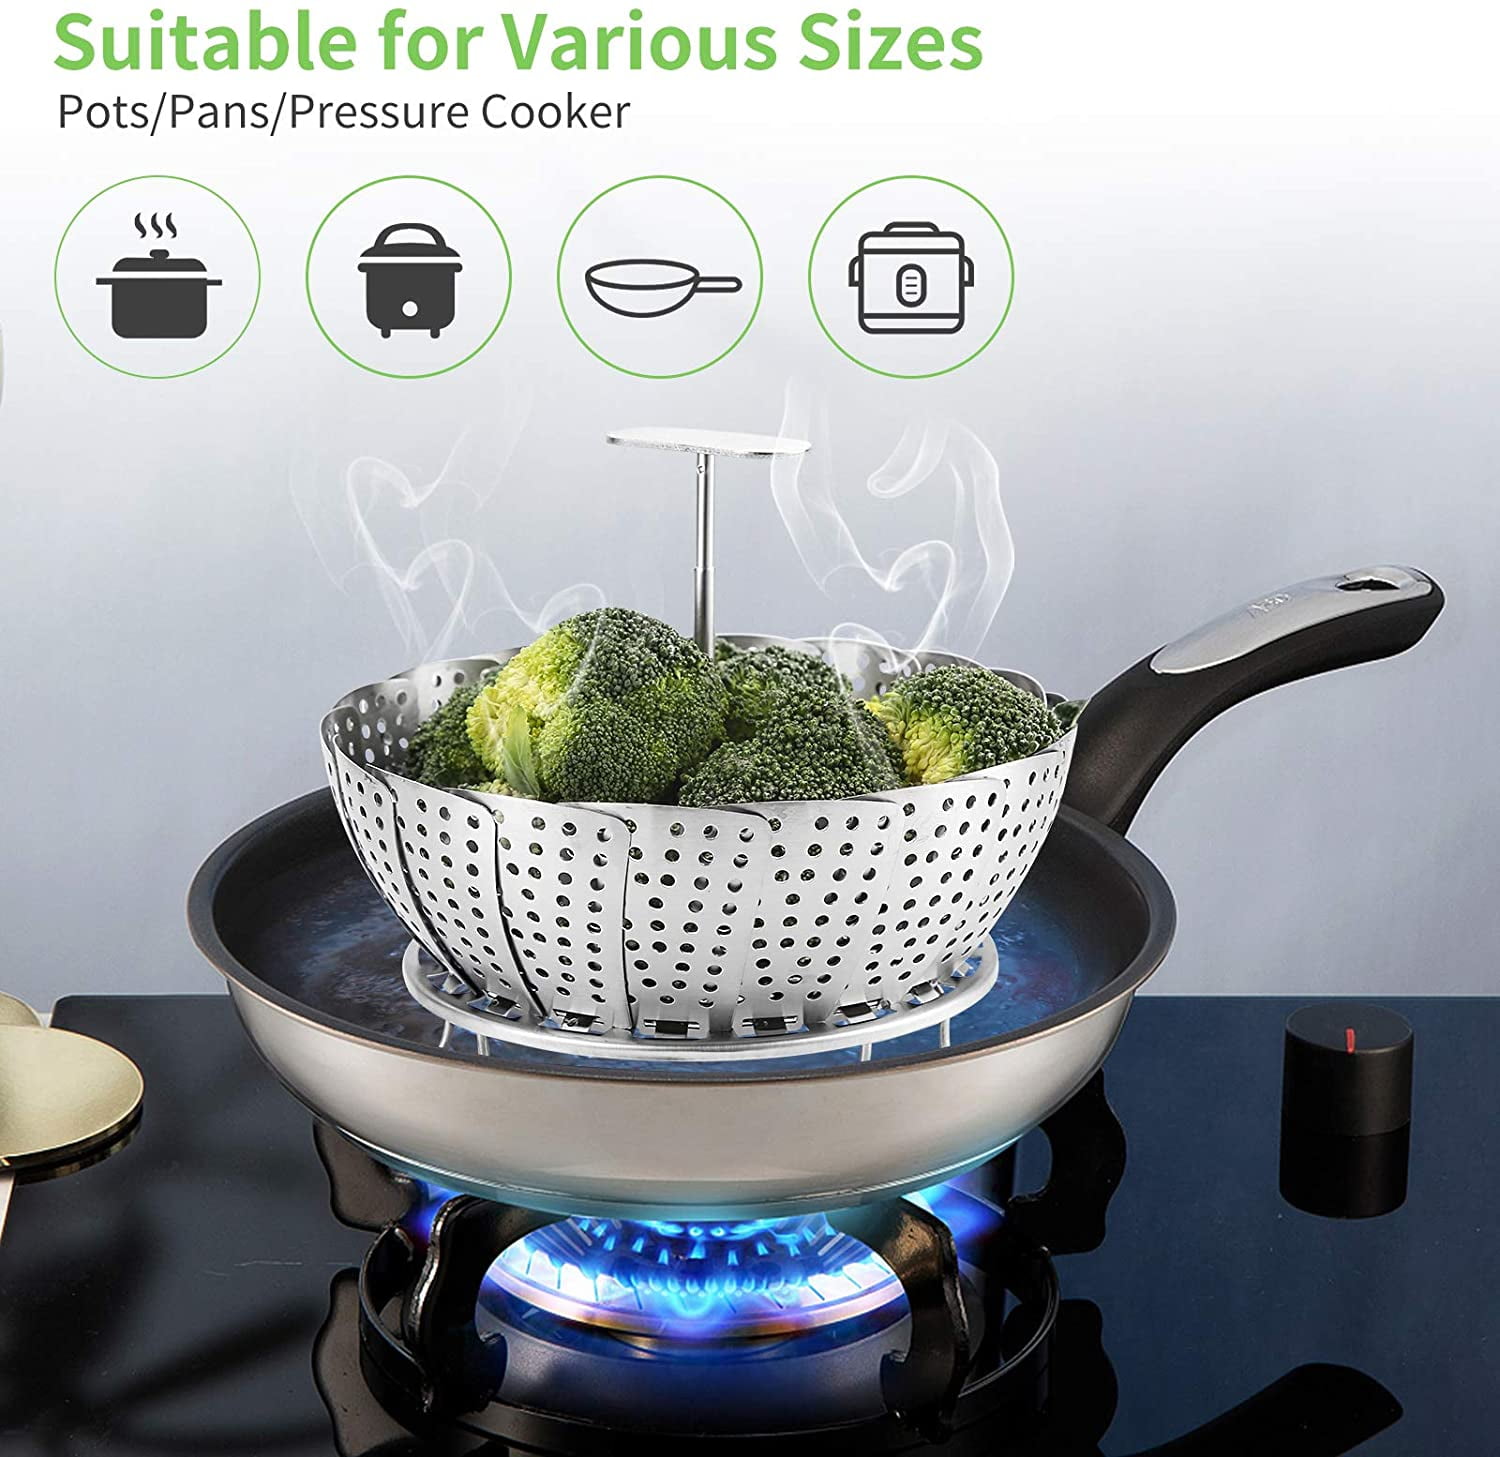  Steam Basket,304 Stainless Steel Steamer Pot Large Capacity  Stackable Round Steaming Dish Food Steamer with Handle for Vegetables  Seafood: Home & Kitchen